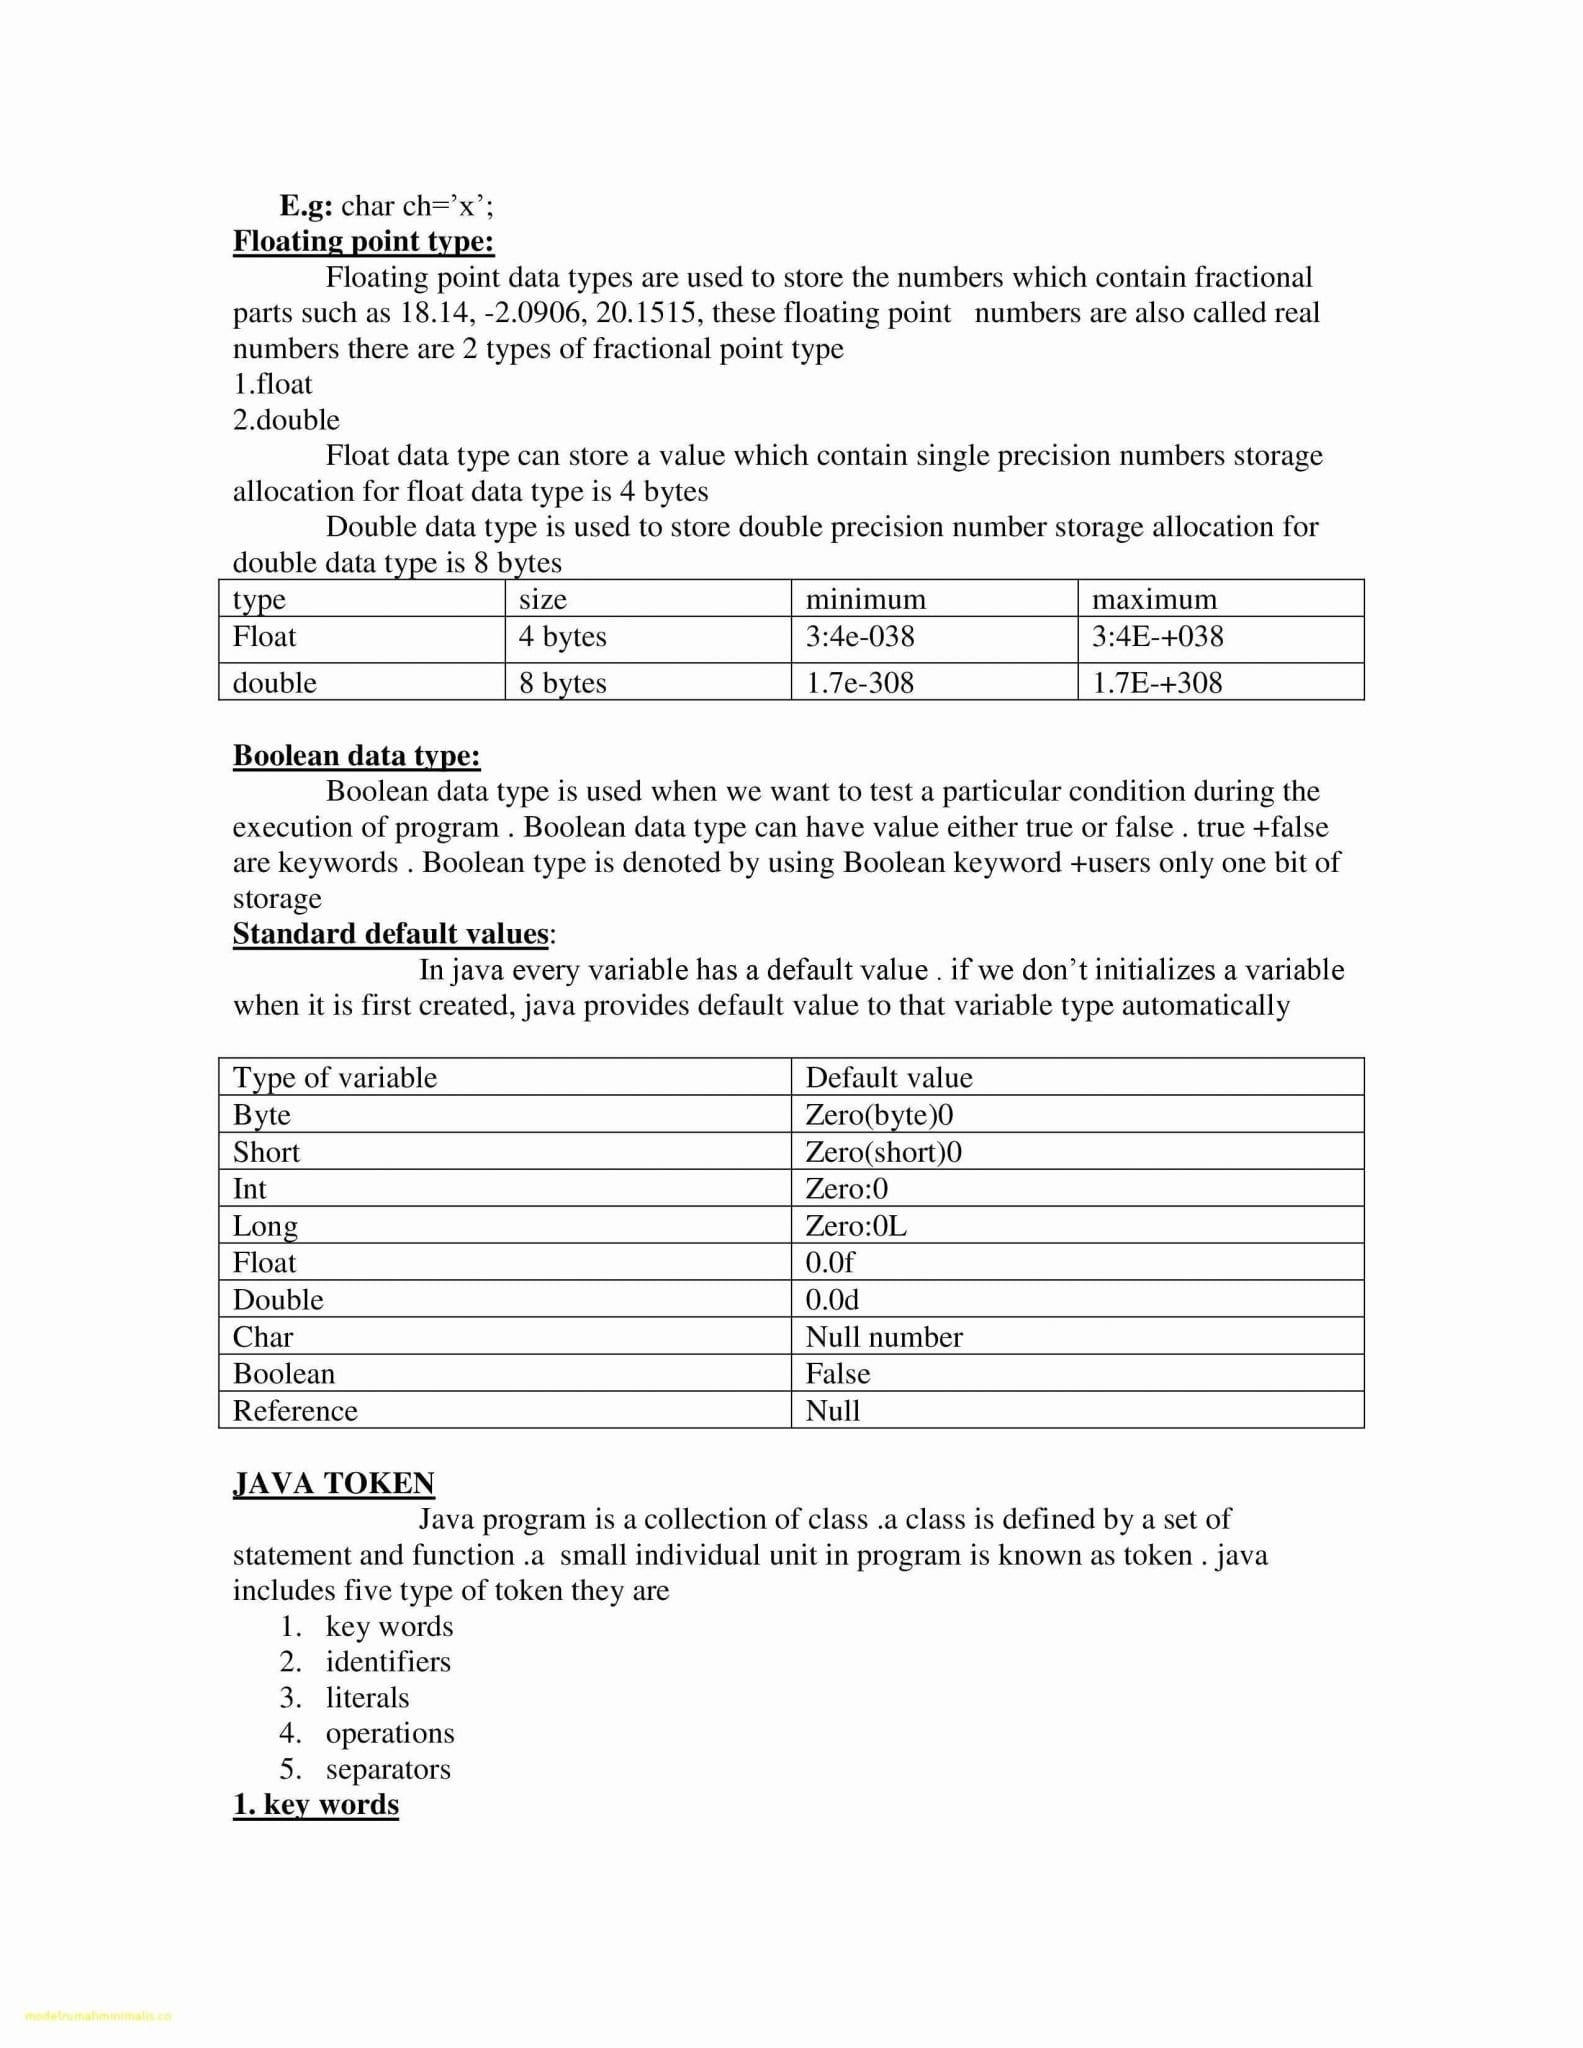 Basic Geometry Definitions Worksheet Answers  Briefencounters Along With Basic Geometry Definitions Worksheet Answers